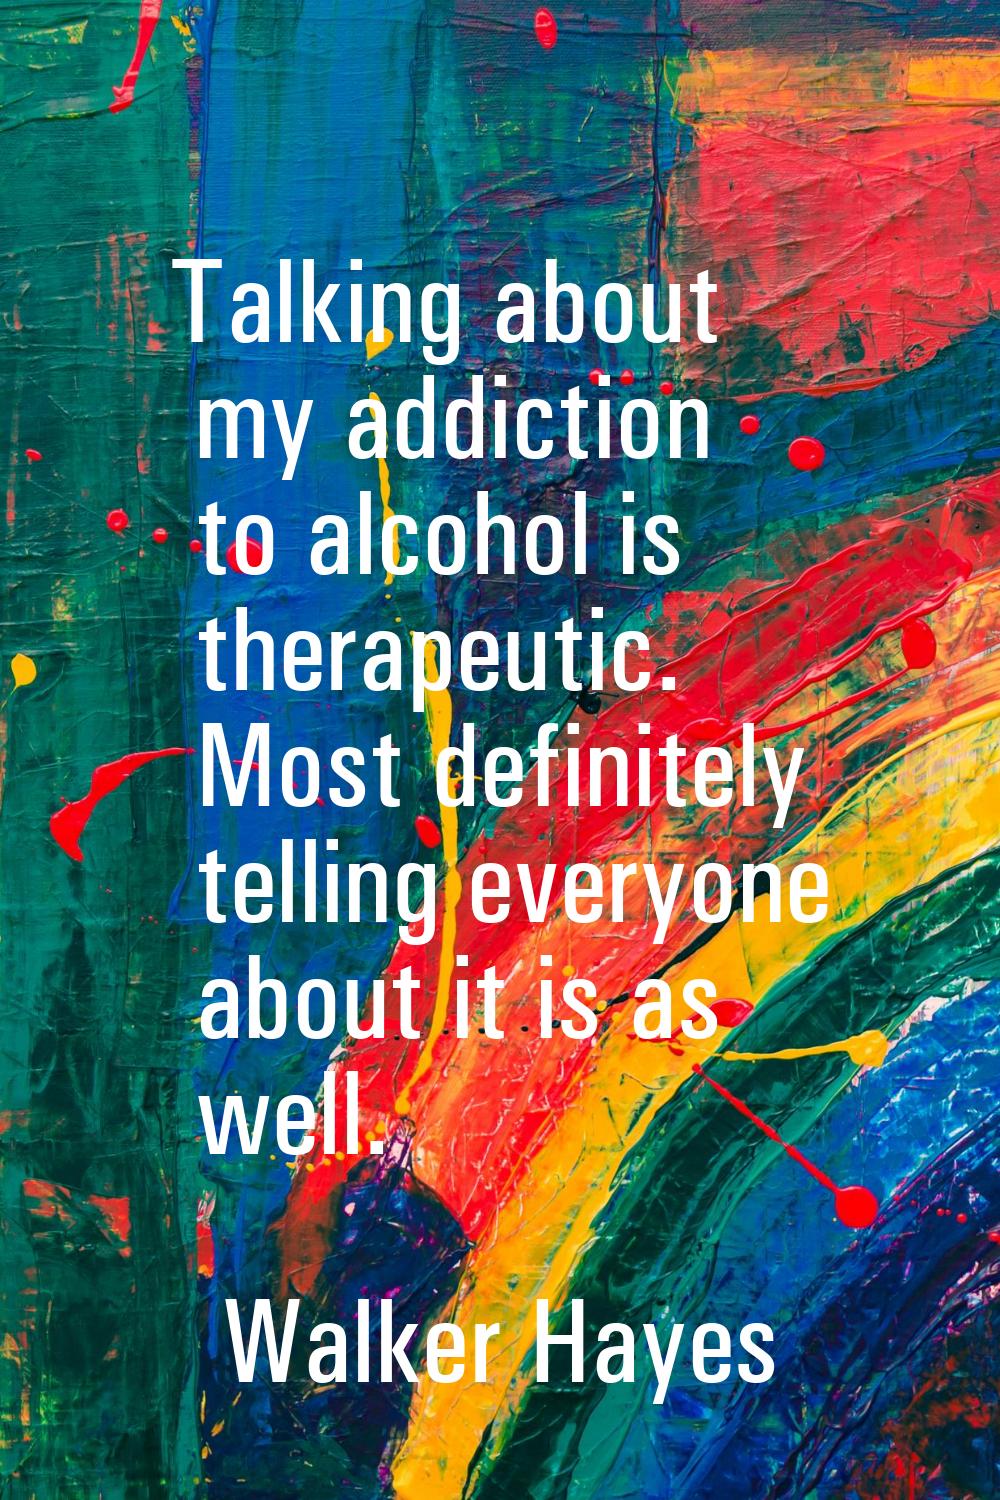 Talking about my addiction to alcohol is therapeutic. Most definitely telling everyone about it is 